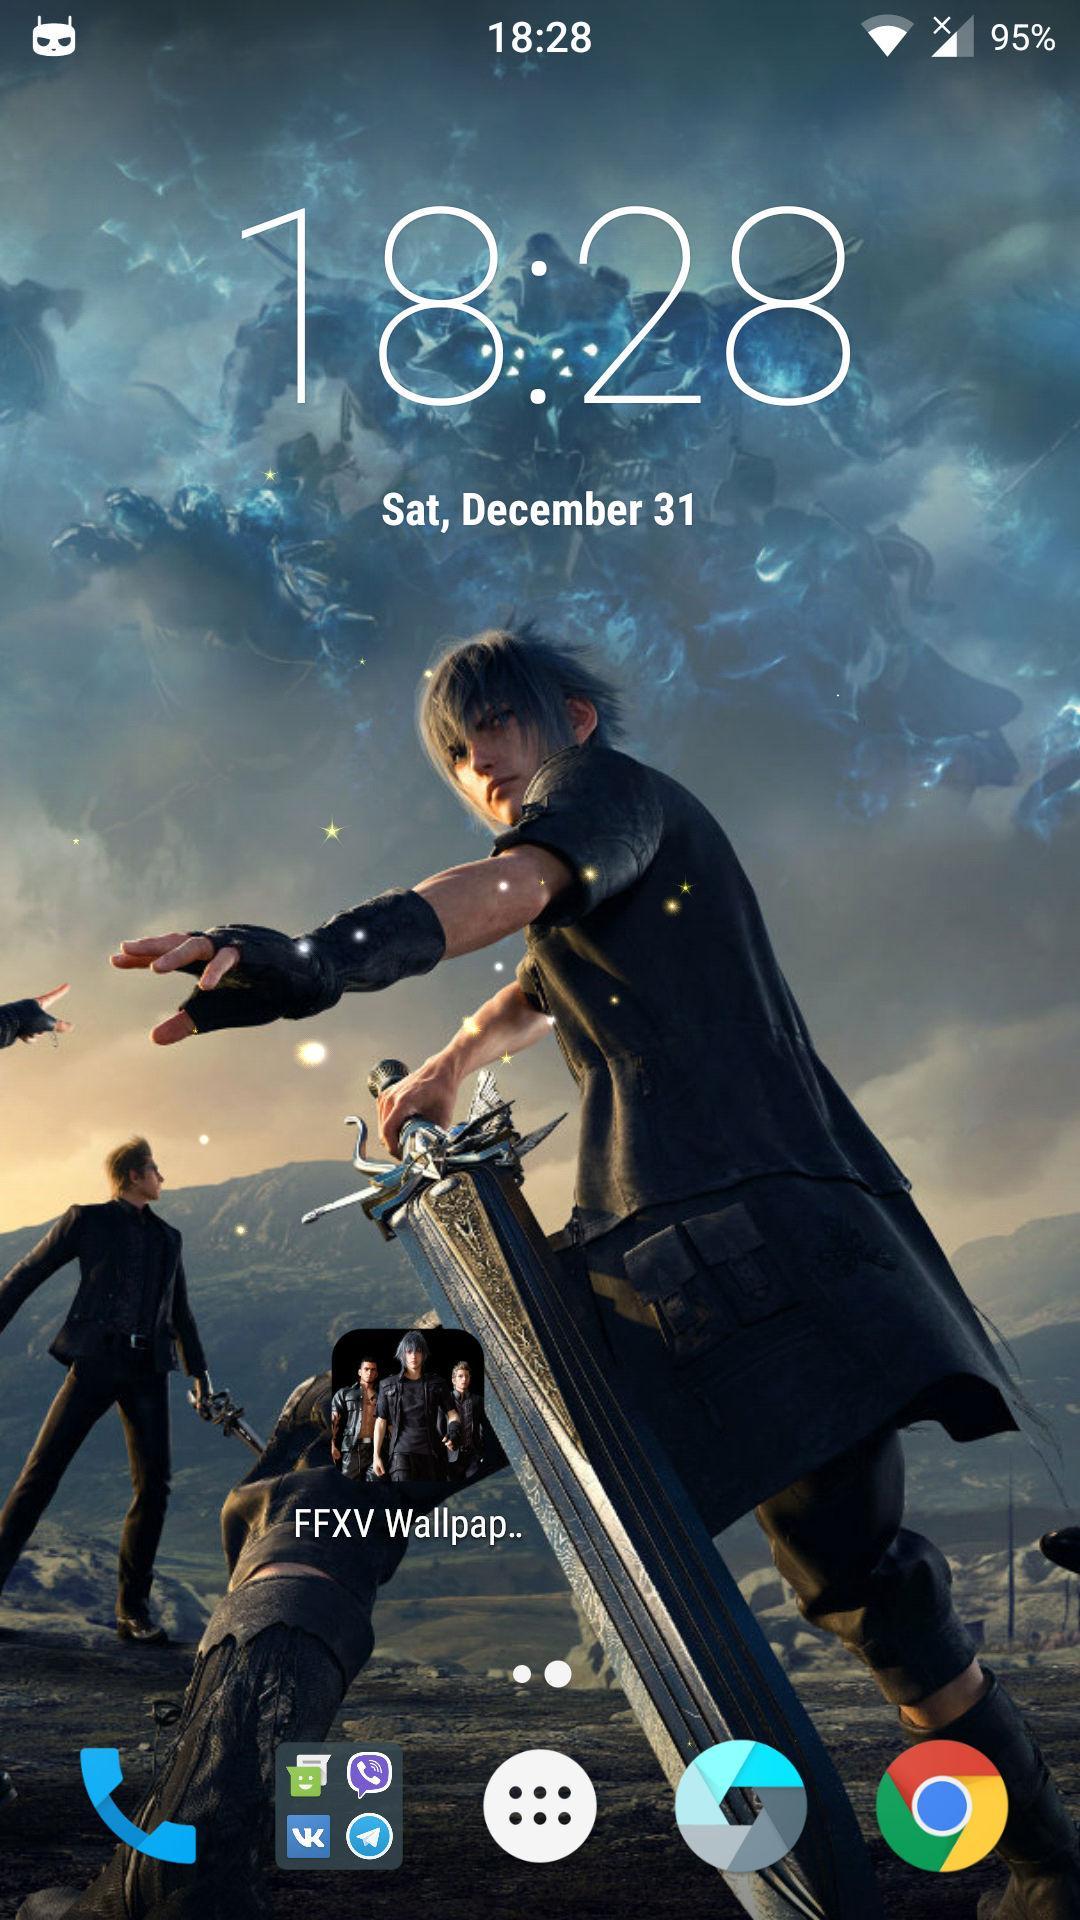 Ffxv Wallpaper Hd 15 For Android Apk Download